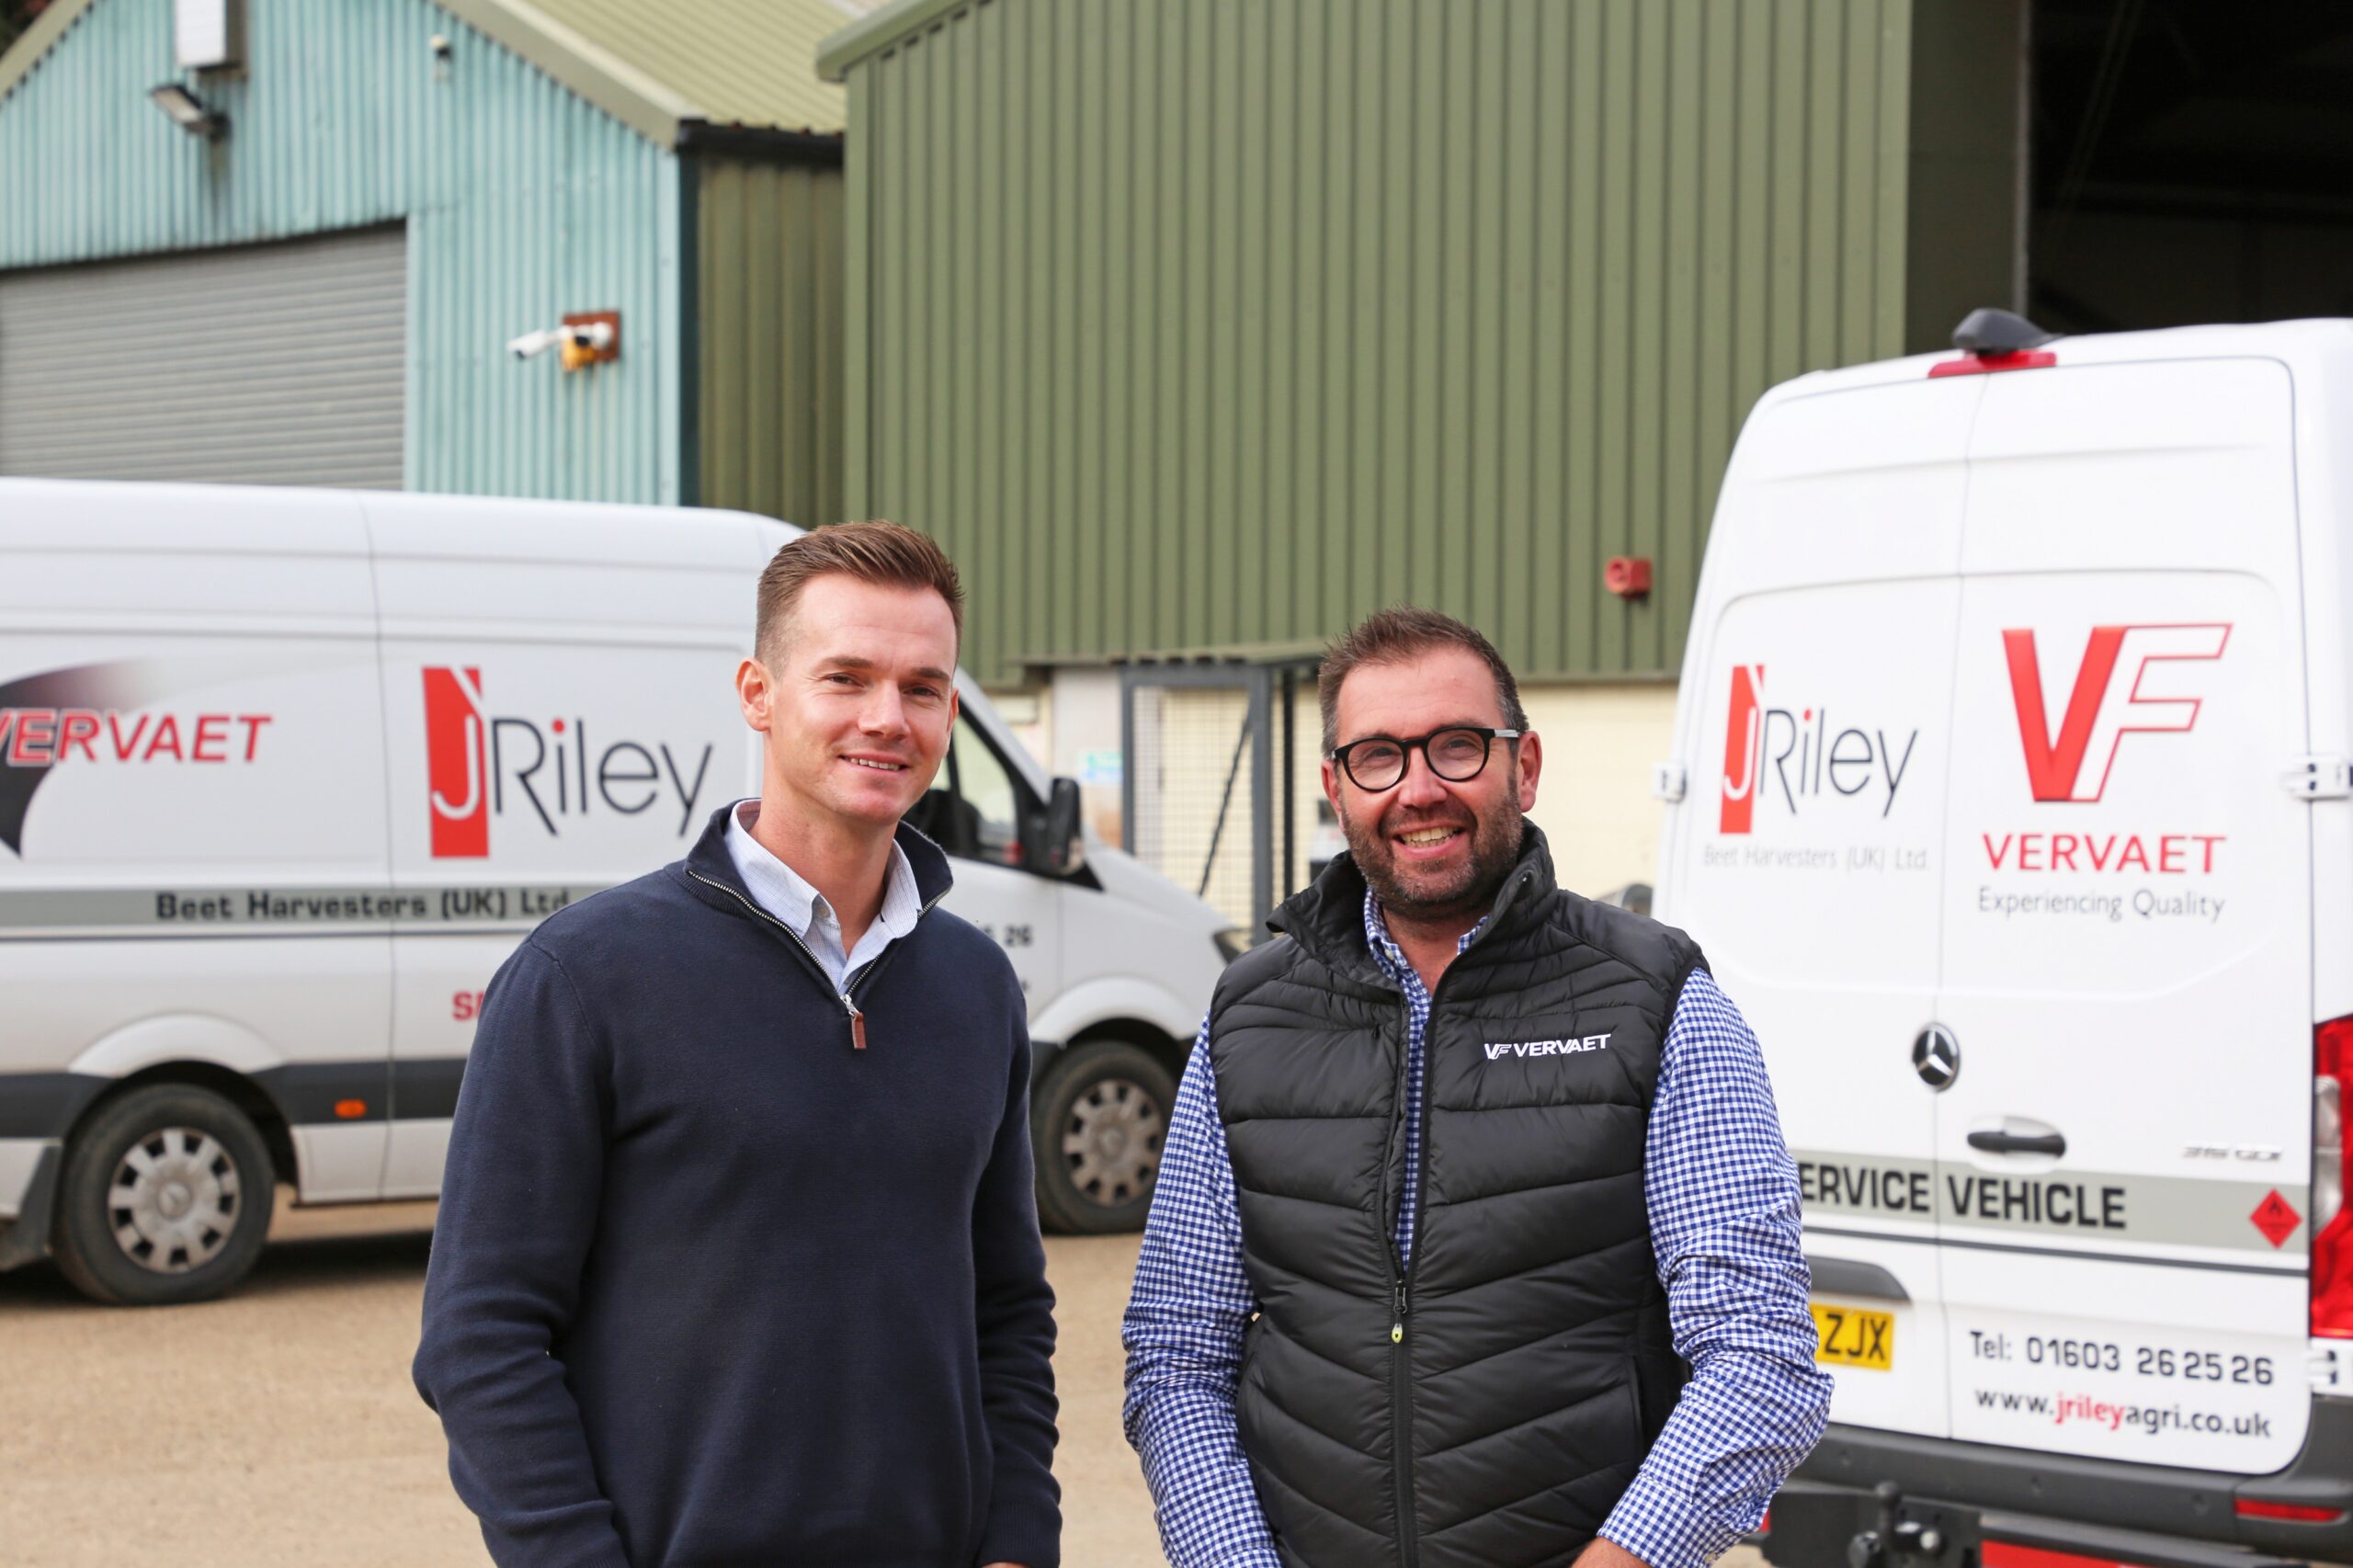  New slurry machinery ranges from J Riley 